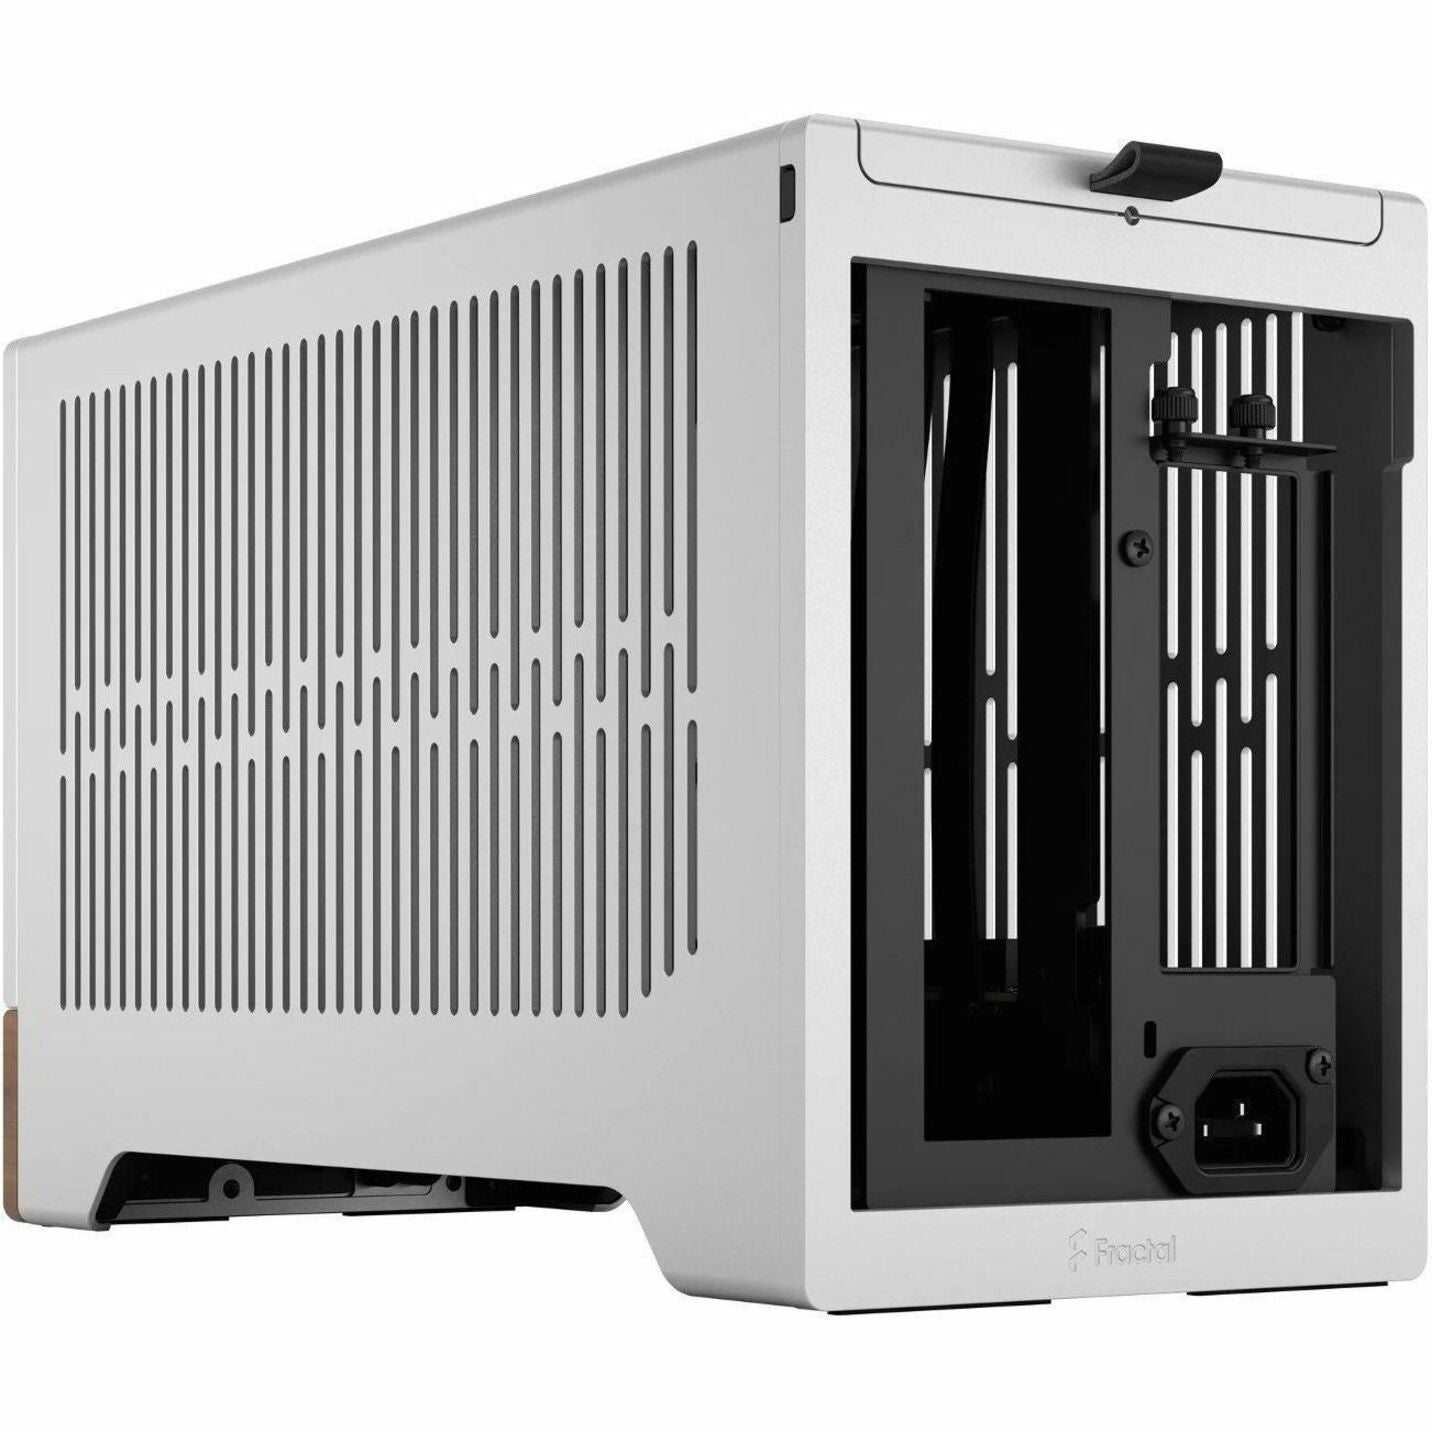 Introducing the Fractal Terra Mini-ITX Chassis